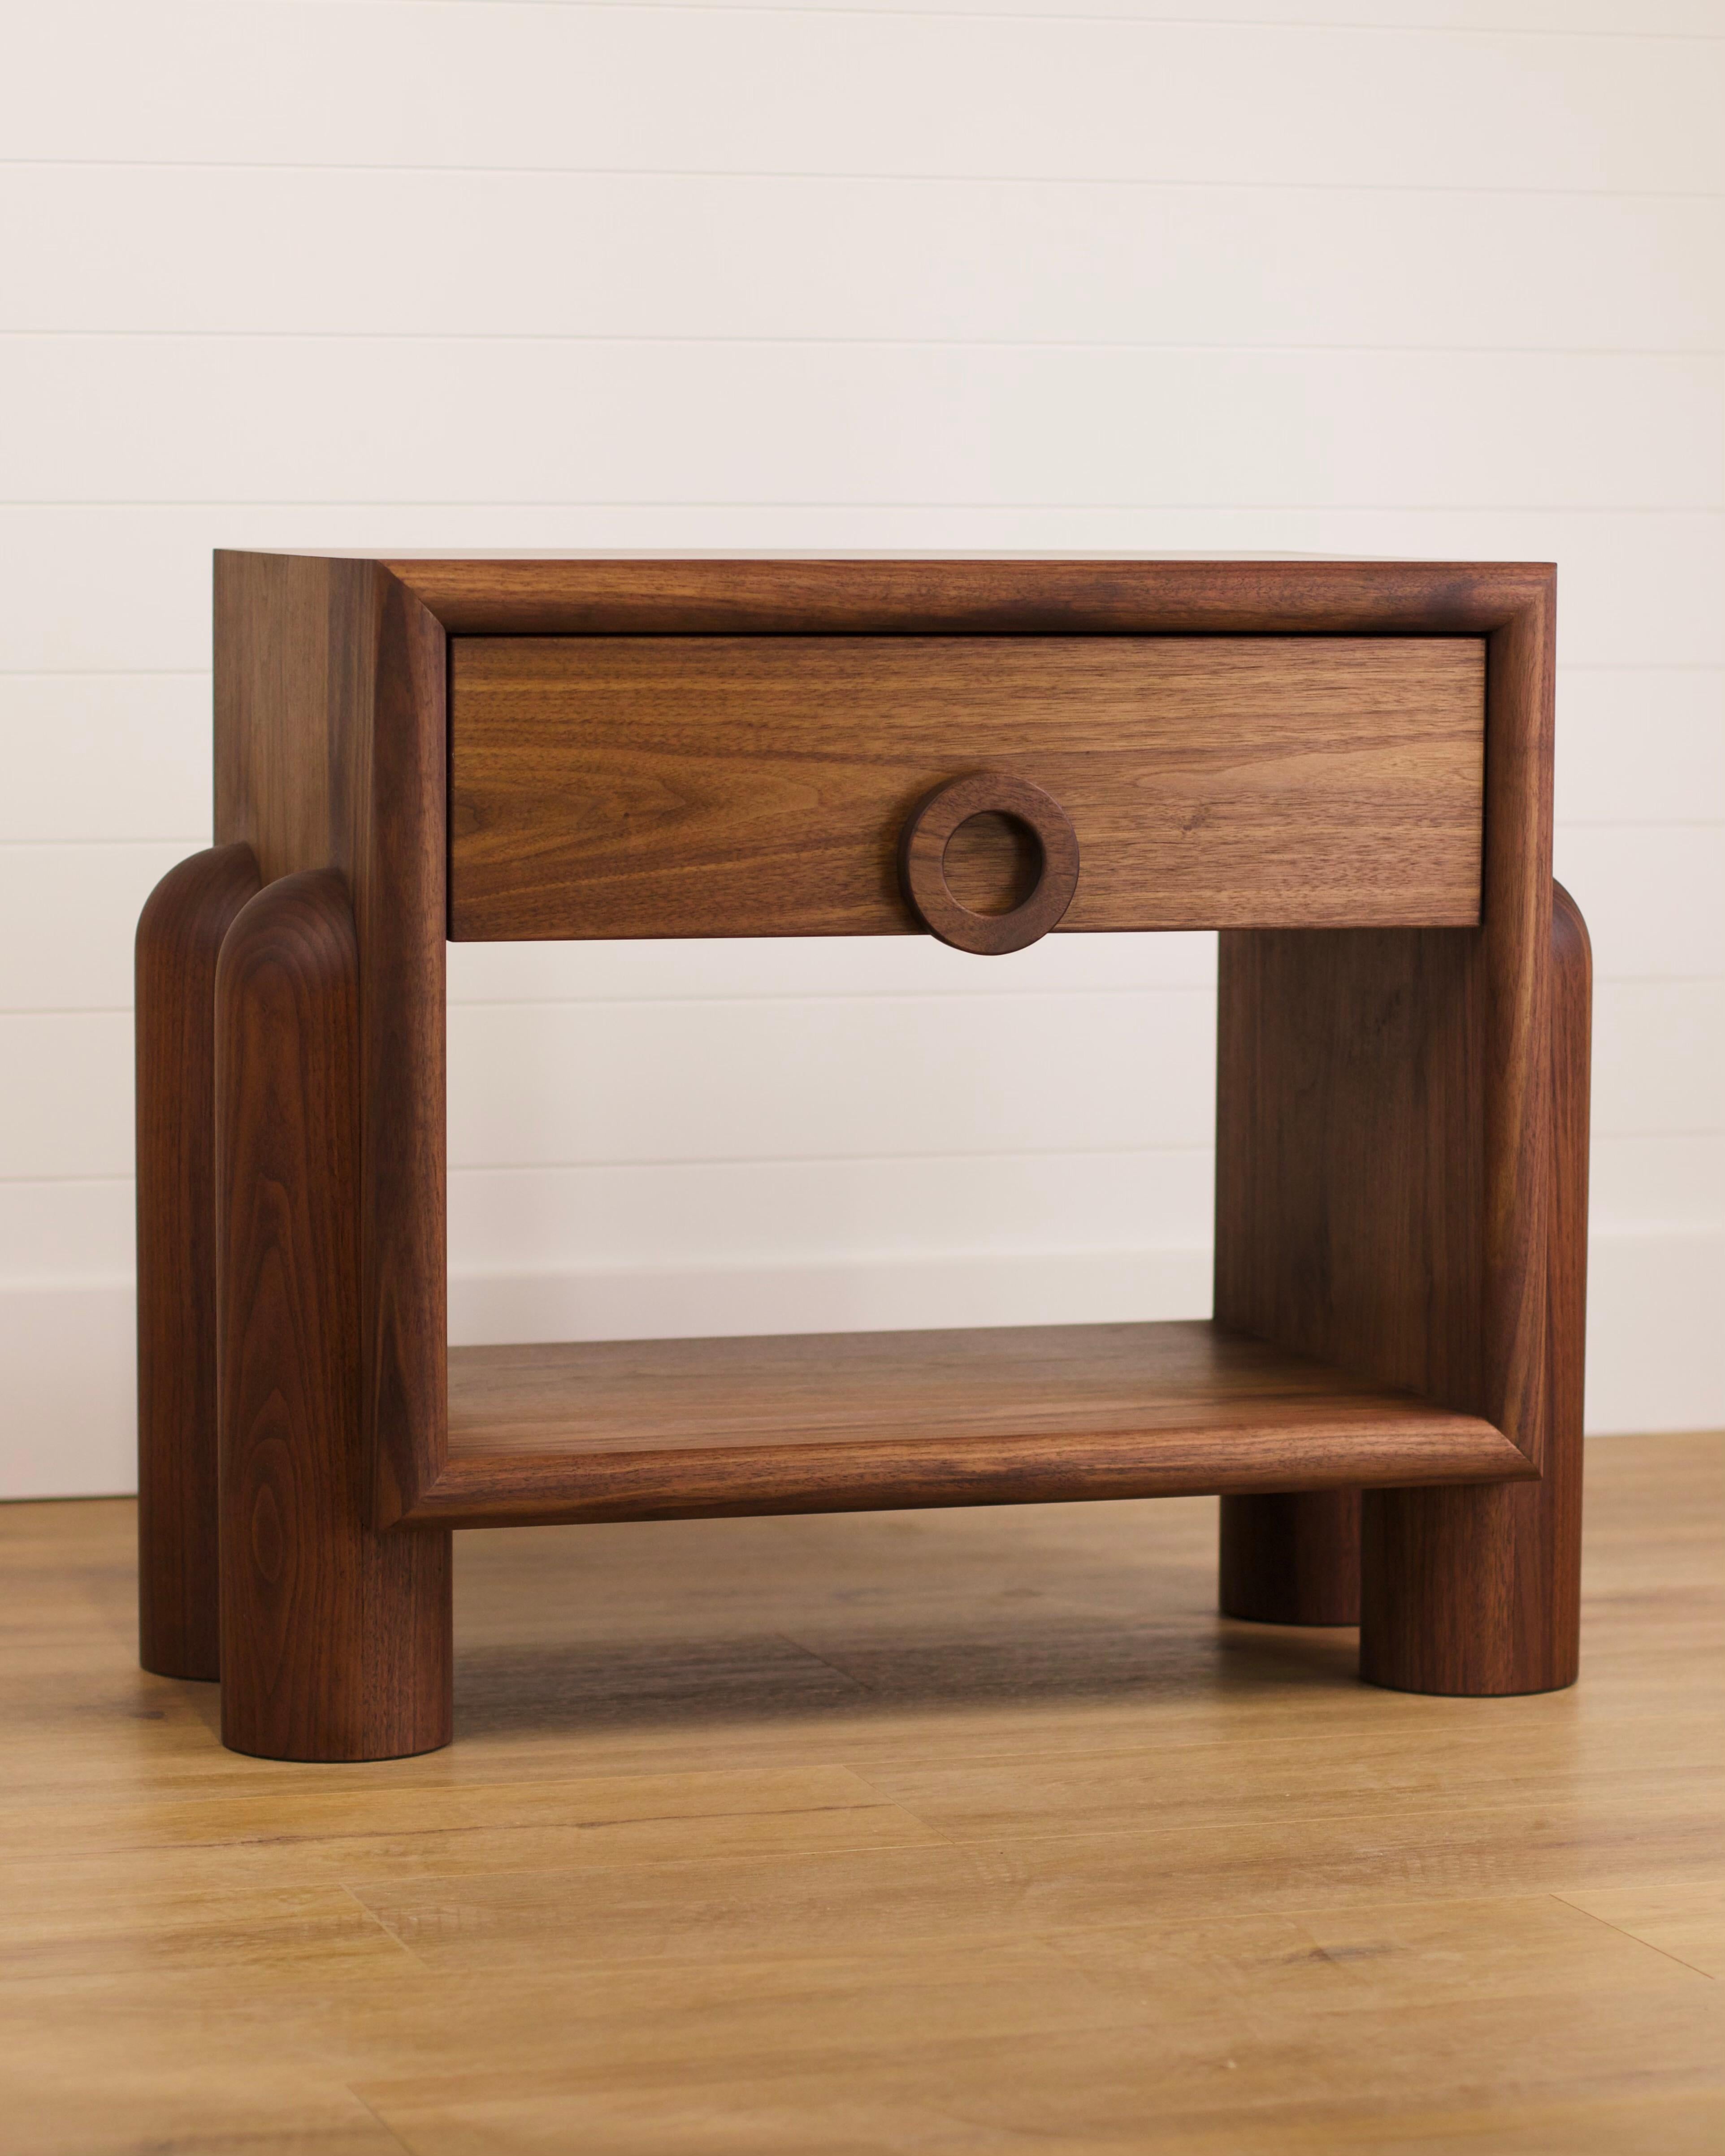 The Dub Series collection by Michael Kussman. New for 2024 - tuck and roll front face nightstand with single drawer. 18” solid hand turned legs that appear to be projecting through the cabinet.  All solid walnut hardwood with ash drawers.

Also